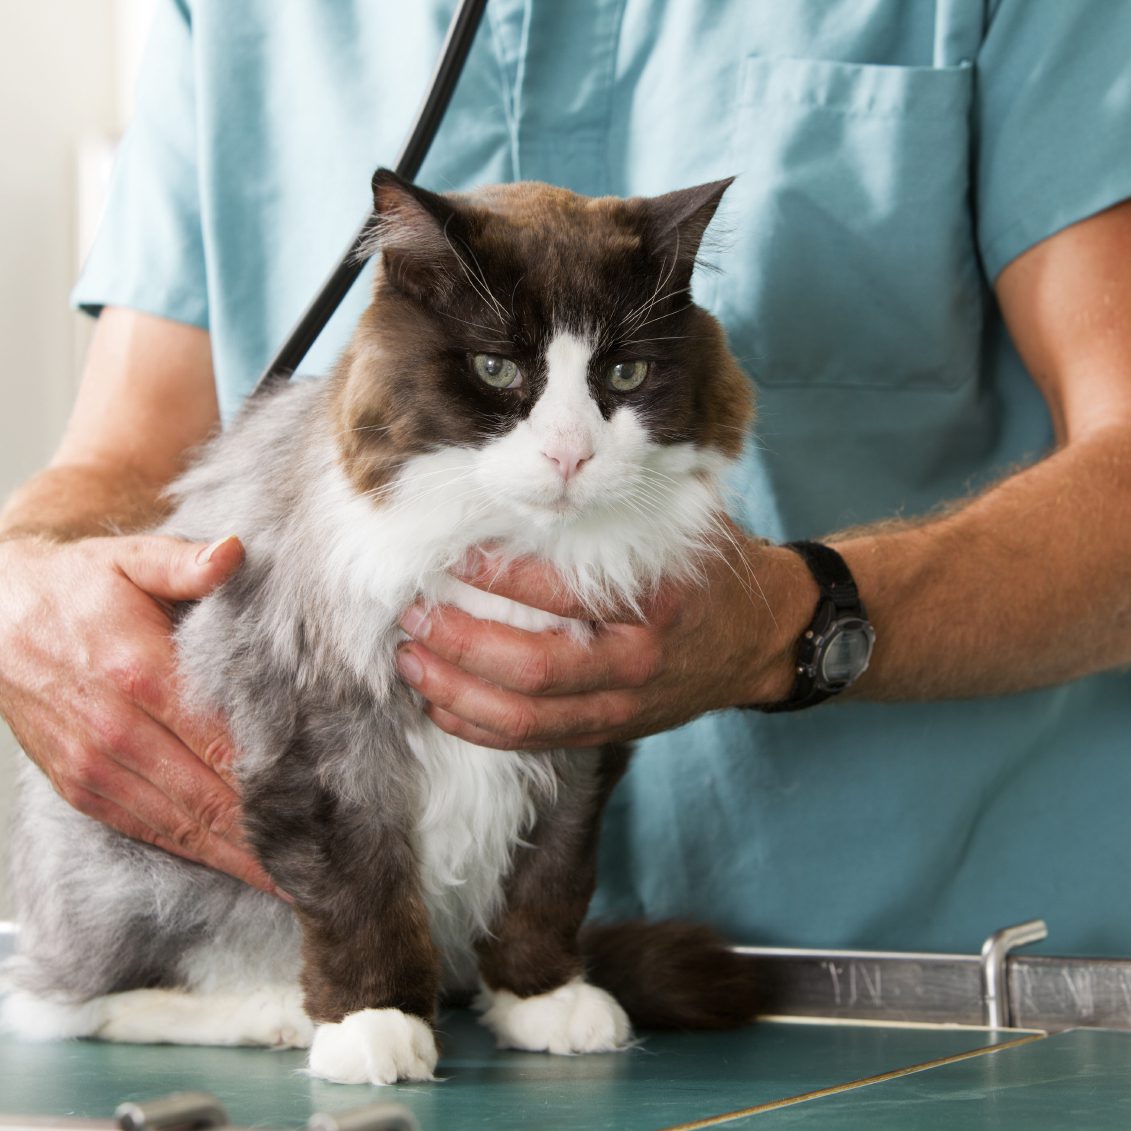 A cat having a check-up at a small animal vet clinic.